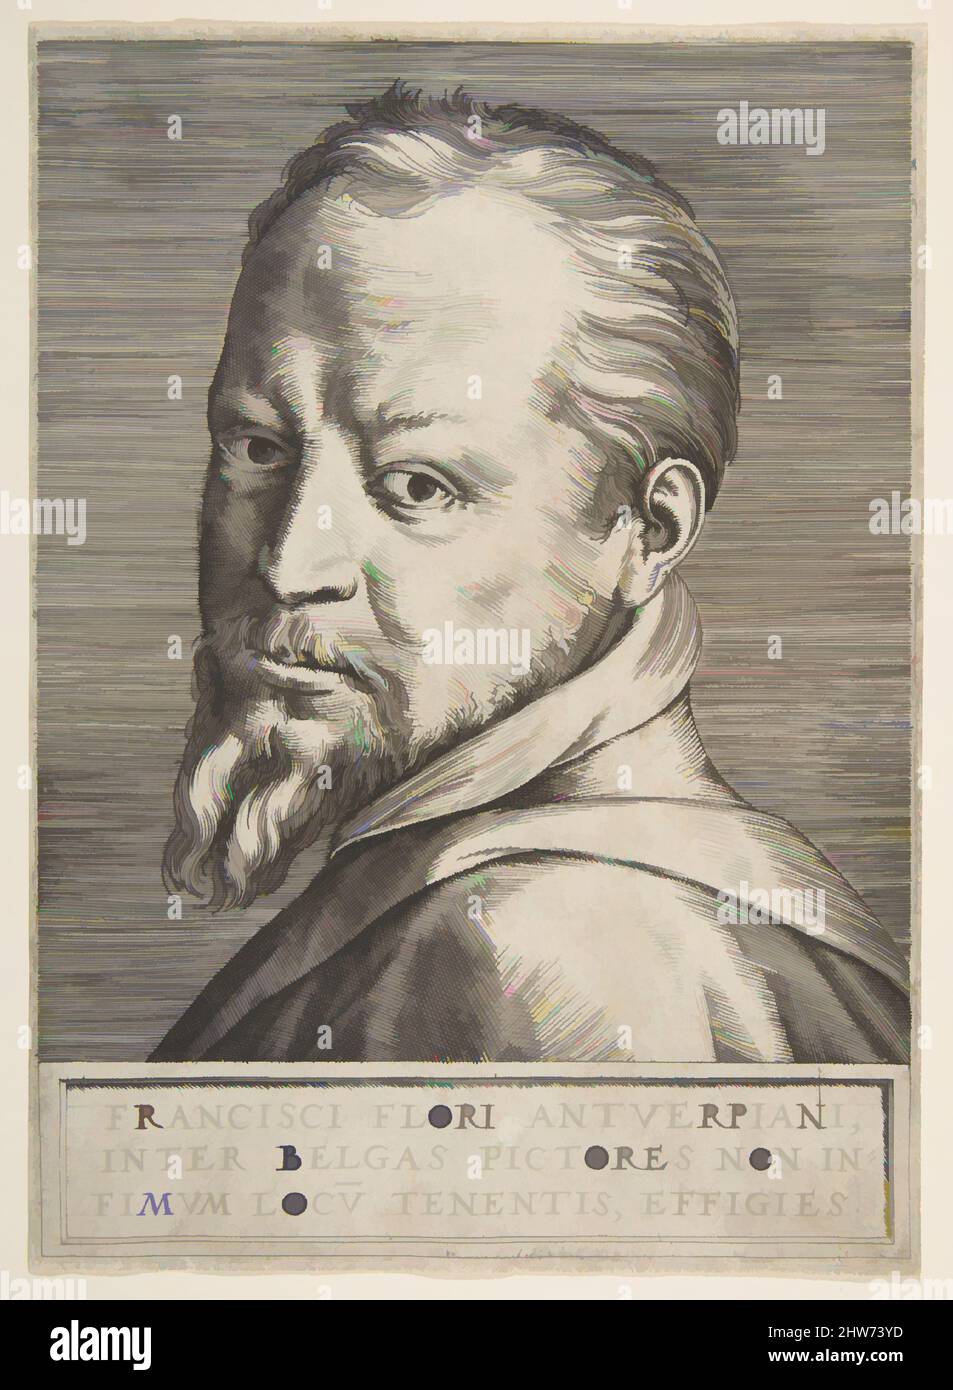 Art inspired by Bust portrait of Frans Floris, 1531–76, Engraving, sheet: 7 5/16 x 5 3/16 in. (18.5 x 13.2 cm), Prints, Giulio Bonasone (Italian, active Rome and Bologna, 1531–after 1576), Bartsch thinks that the print is after a design by Bonasone and not engraved by him, Classic works modernized by Artotop with a splash of modernity. Shapes, color and value, eye-catching visual impact on art. Emotions through freedom of artworks in a contemporary way. A timeless message pursuing a wildly creative new direction. Artists turning to the digital medium and creating the Artotop NFT Stock Photo